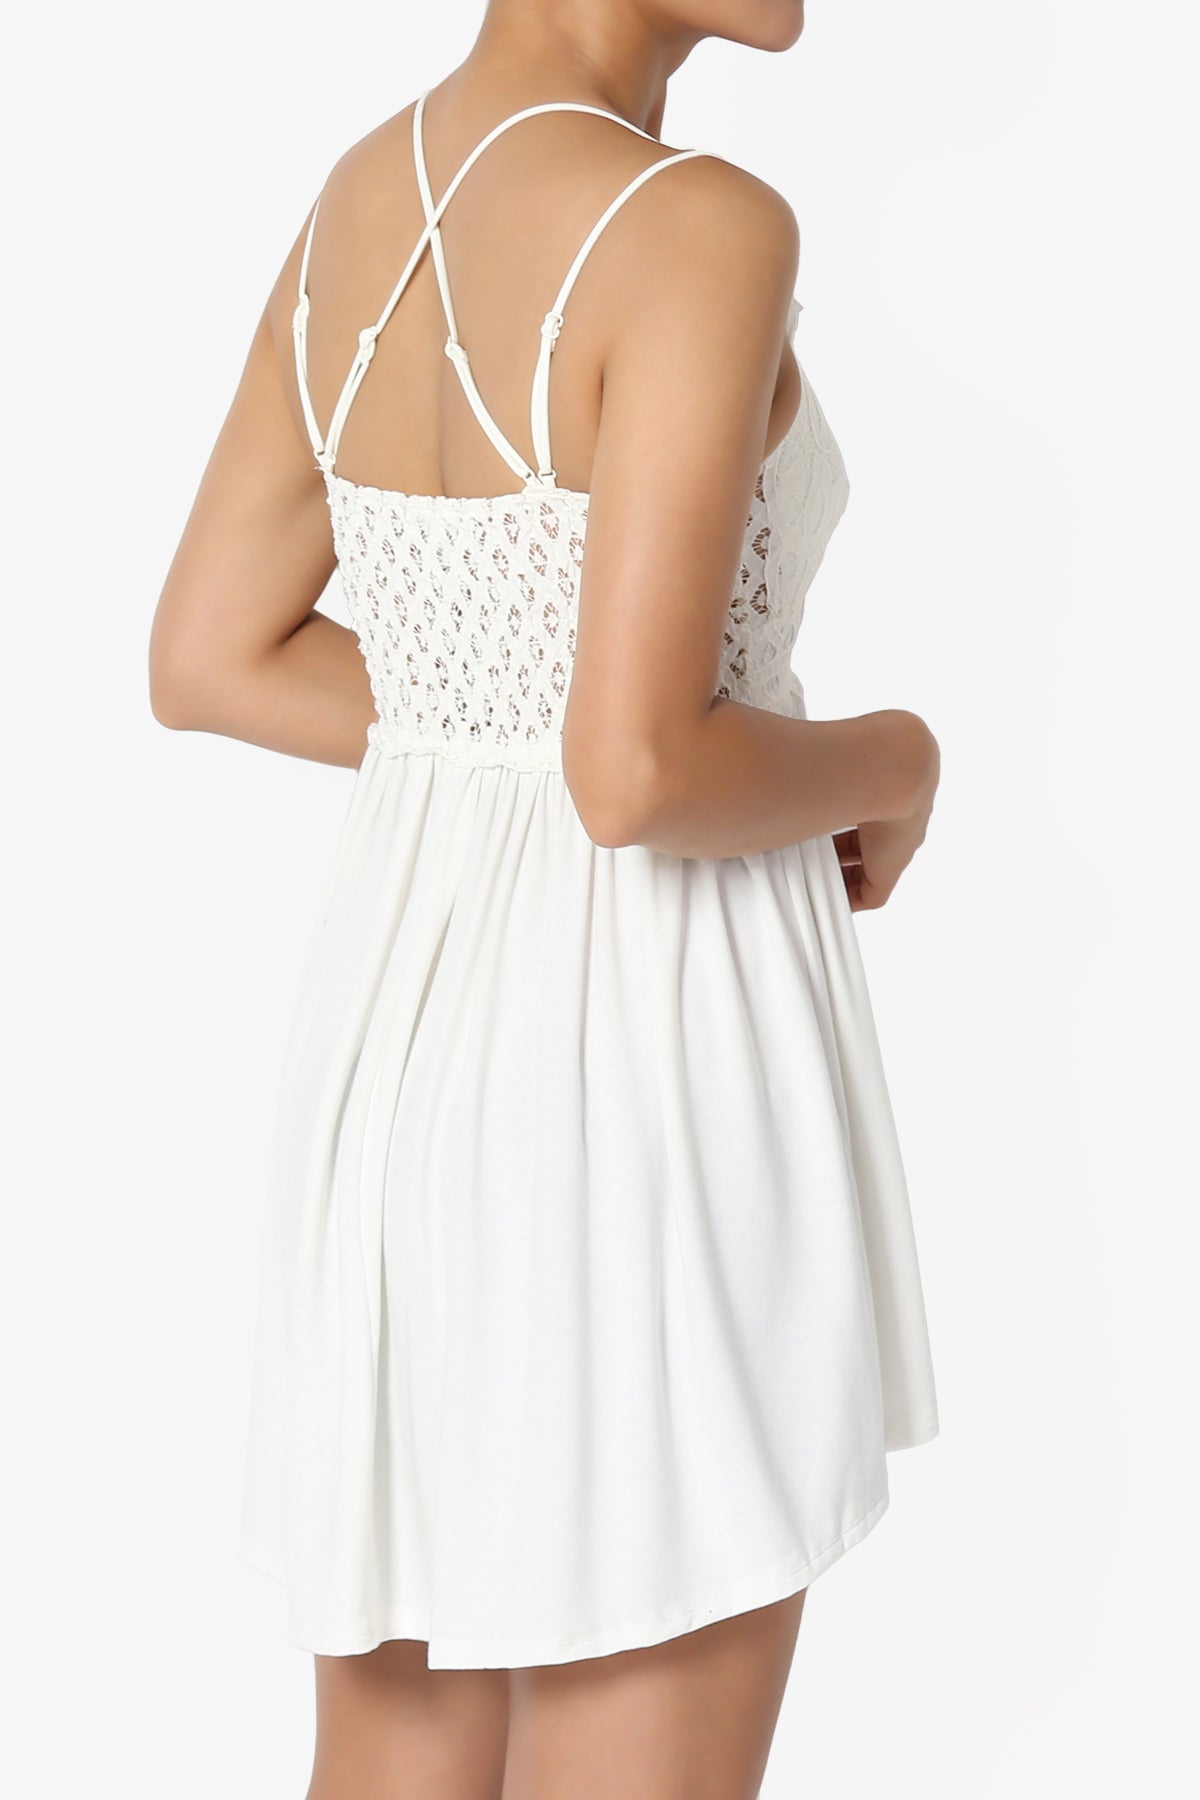 Lynden Crochet Lace Jersey Tunic Cami